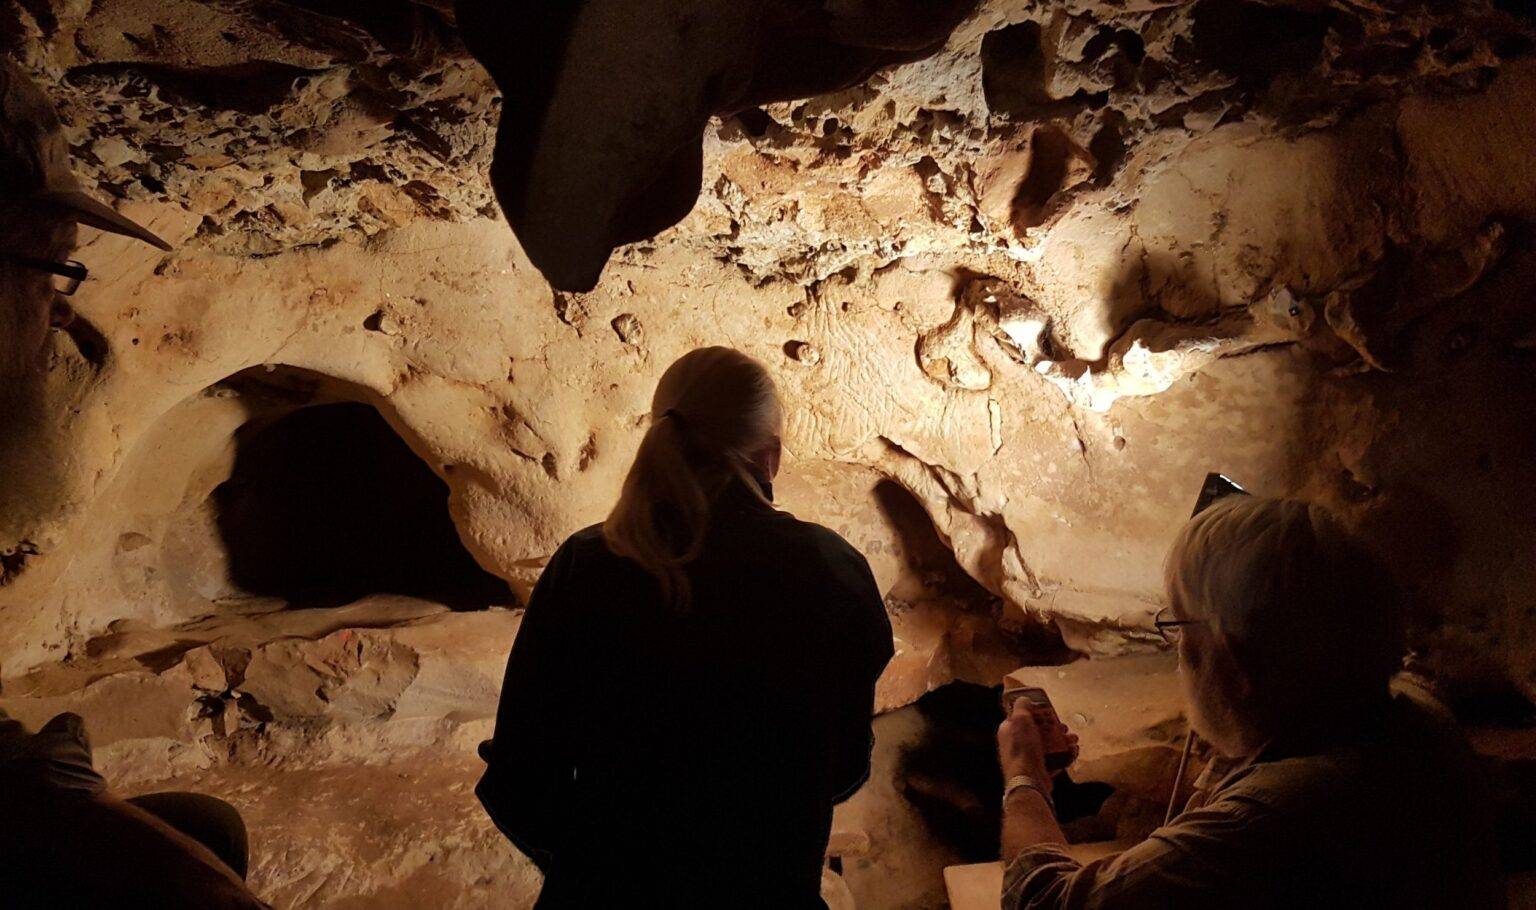 Oldest ever Neanderthal carvings unearthed in sealed cave